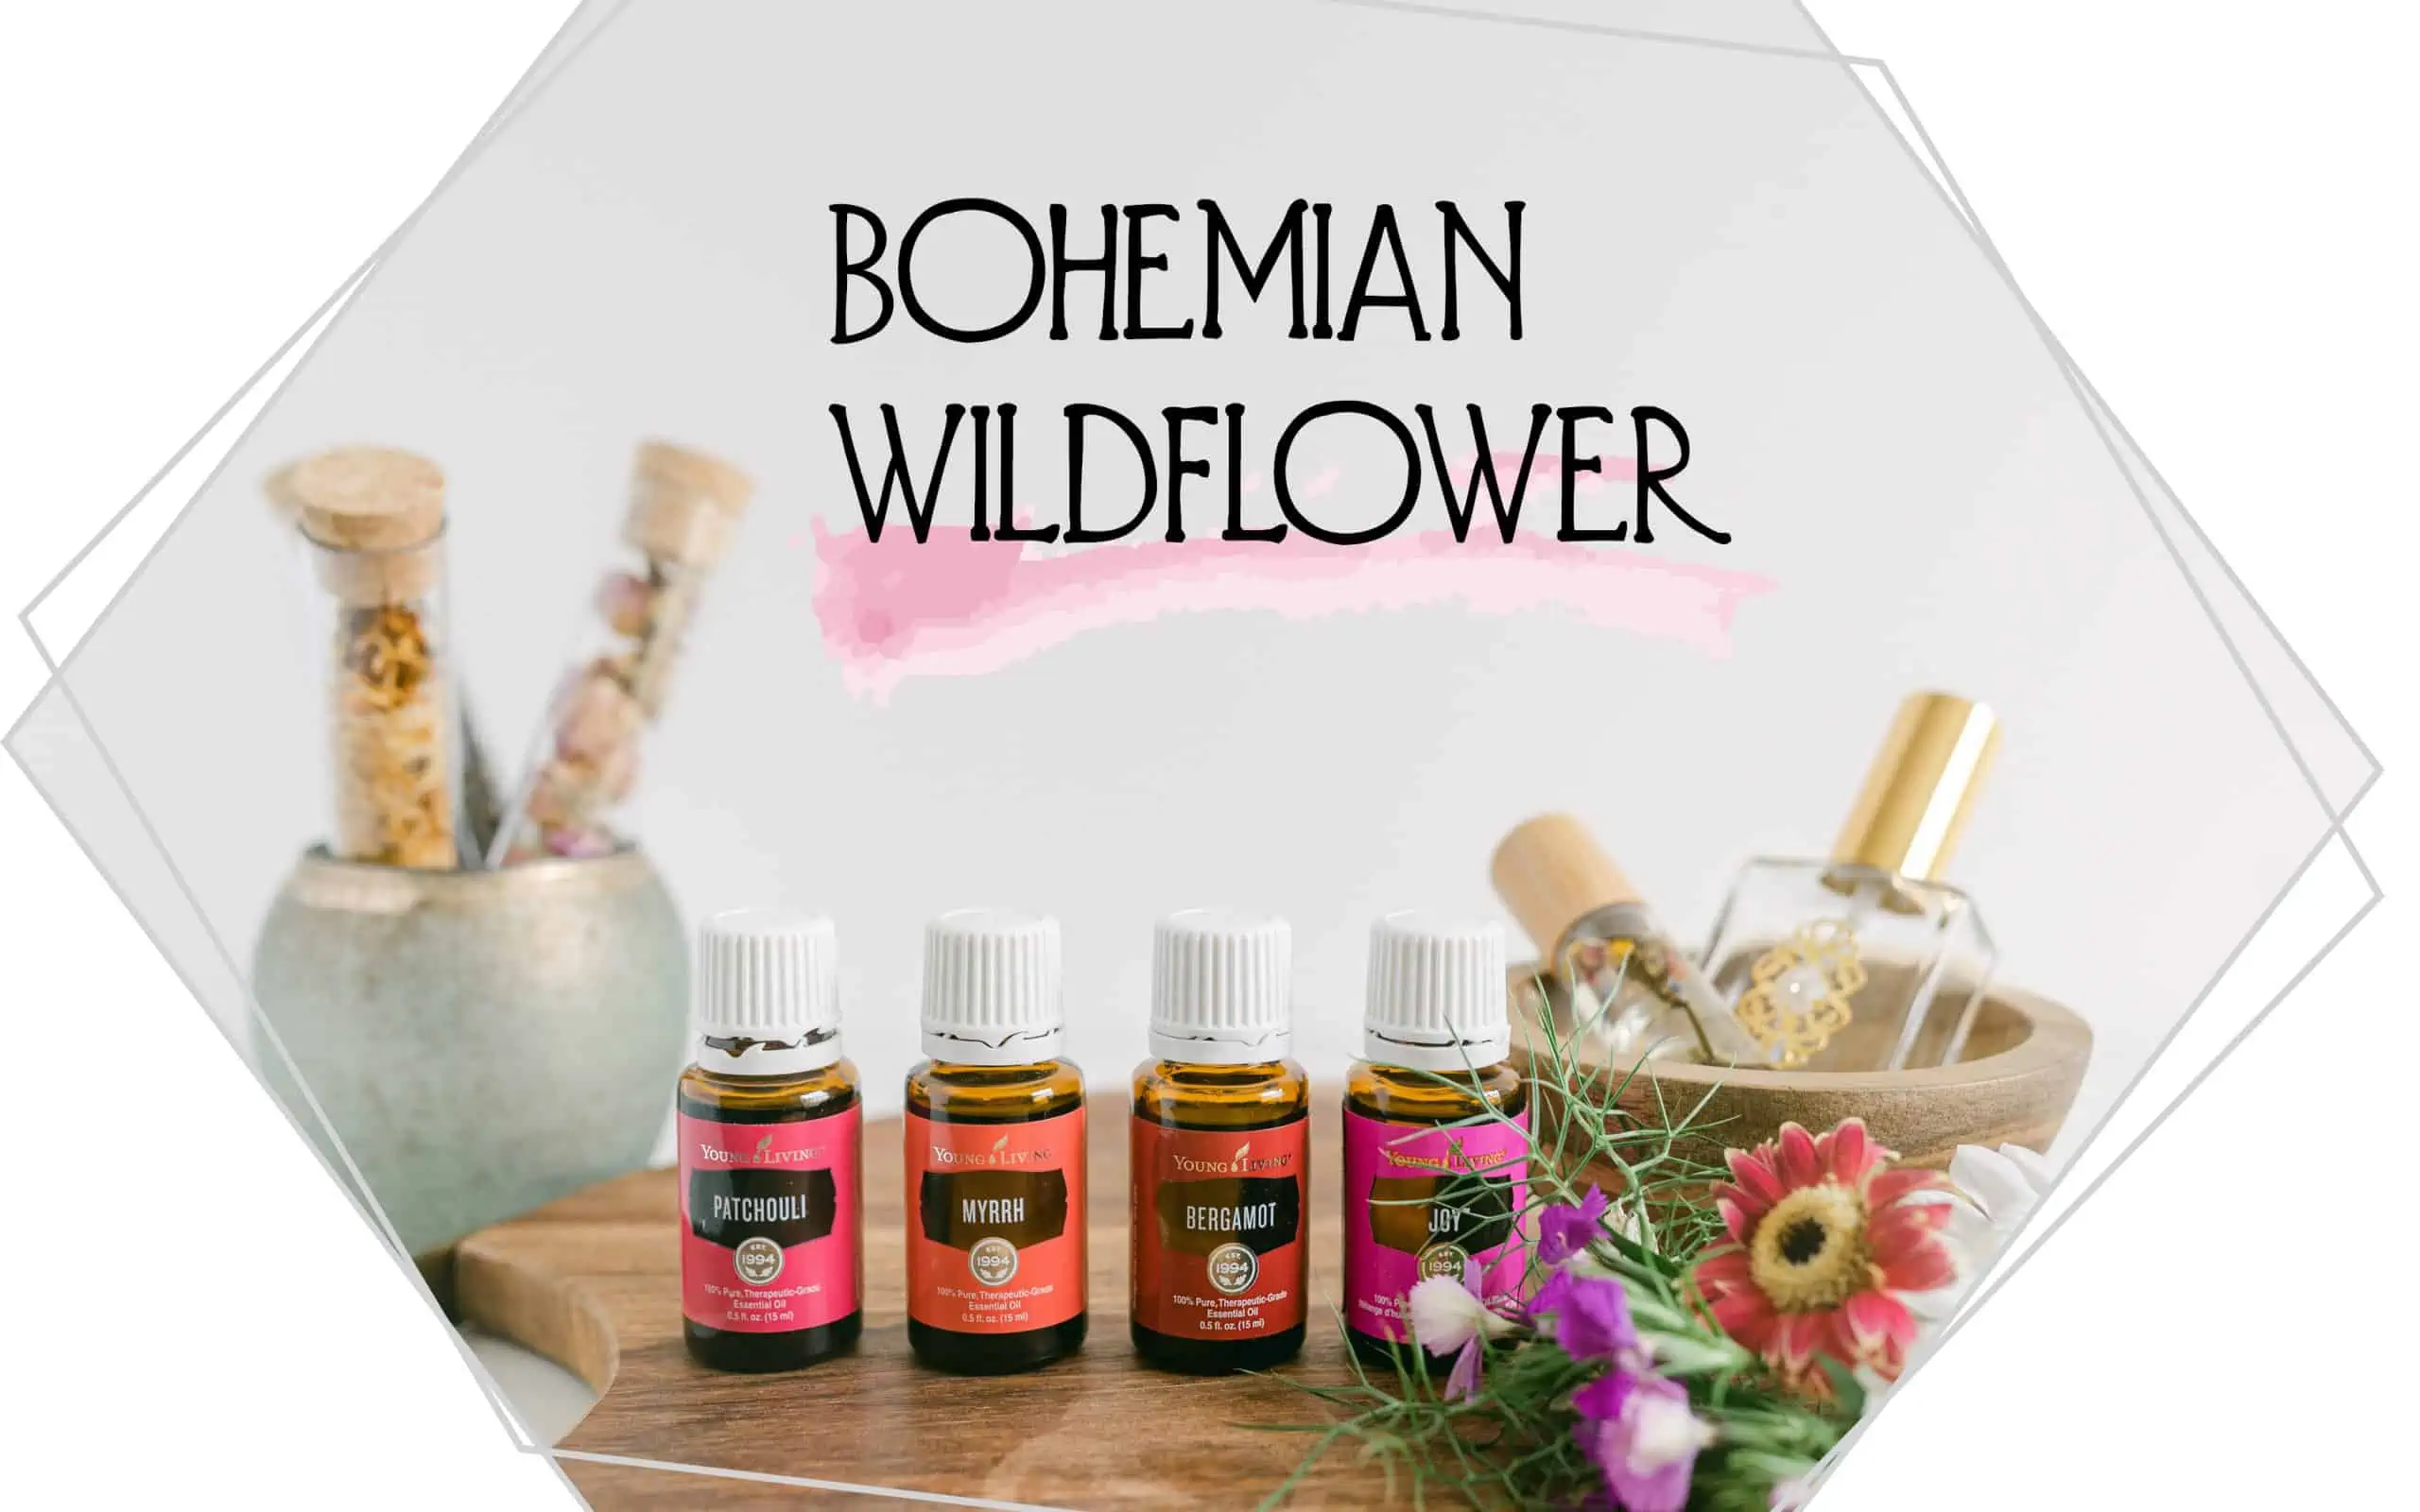 Bohemian Wildflower with essential oils.